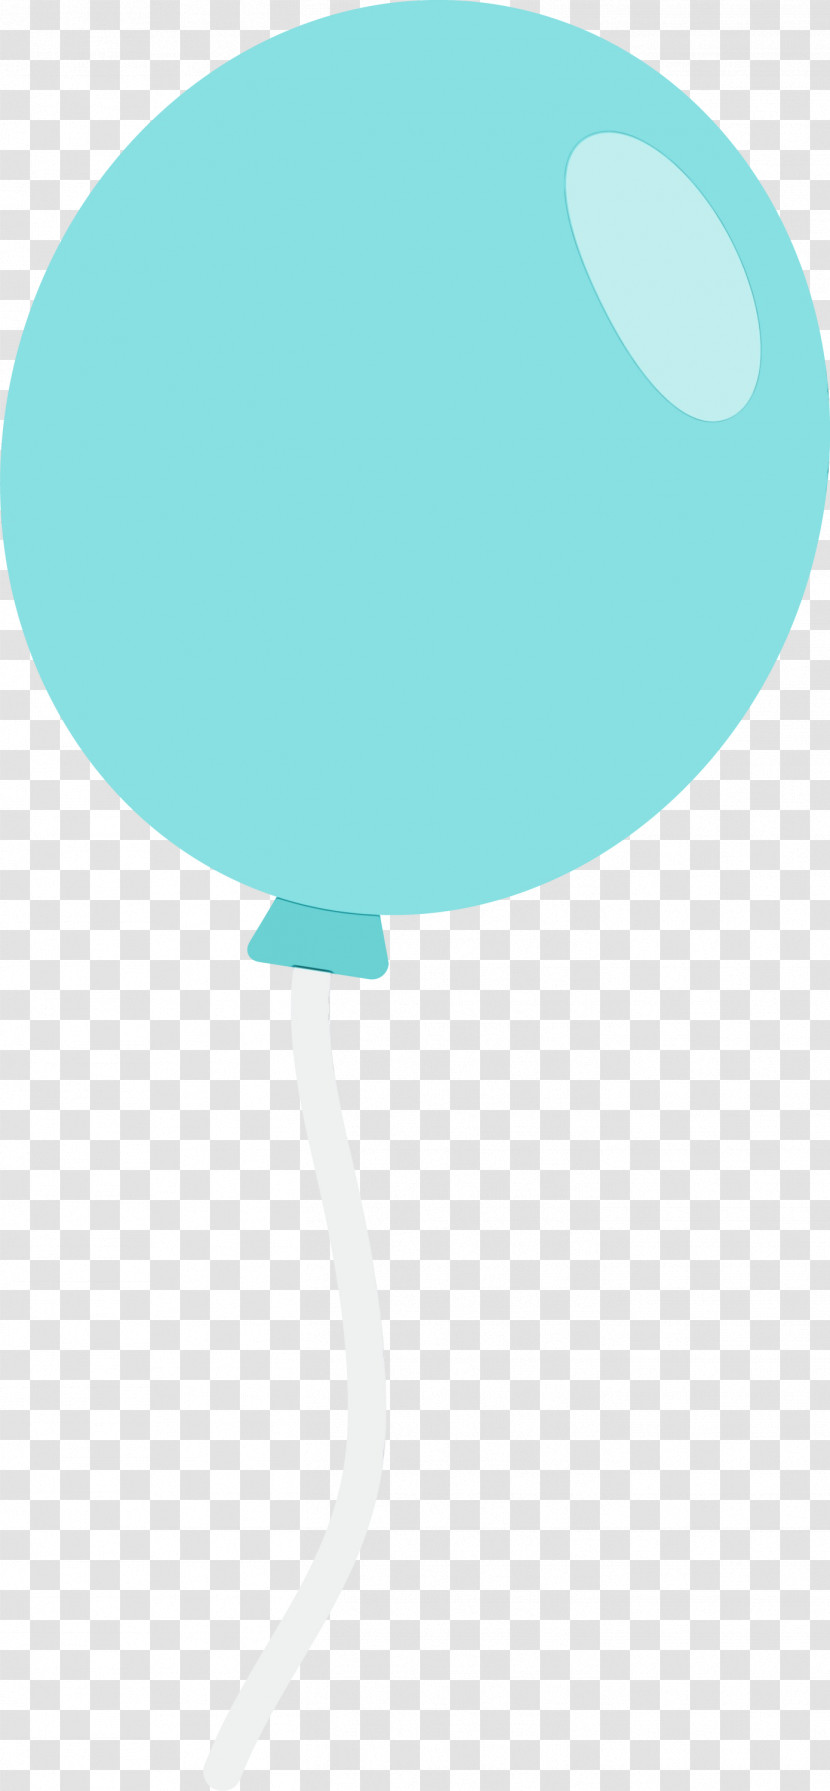 Turquoise Aqua Teal Turquoise Balloon Transparent PNG